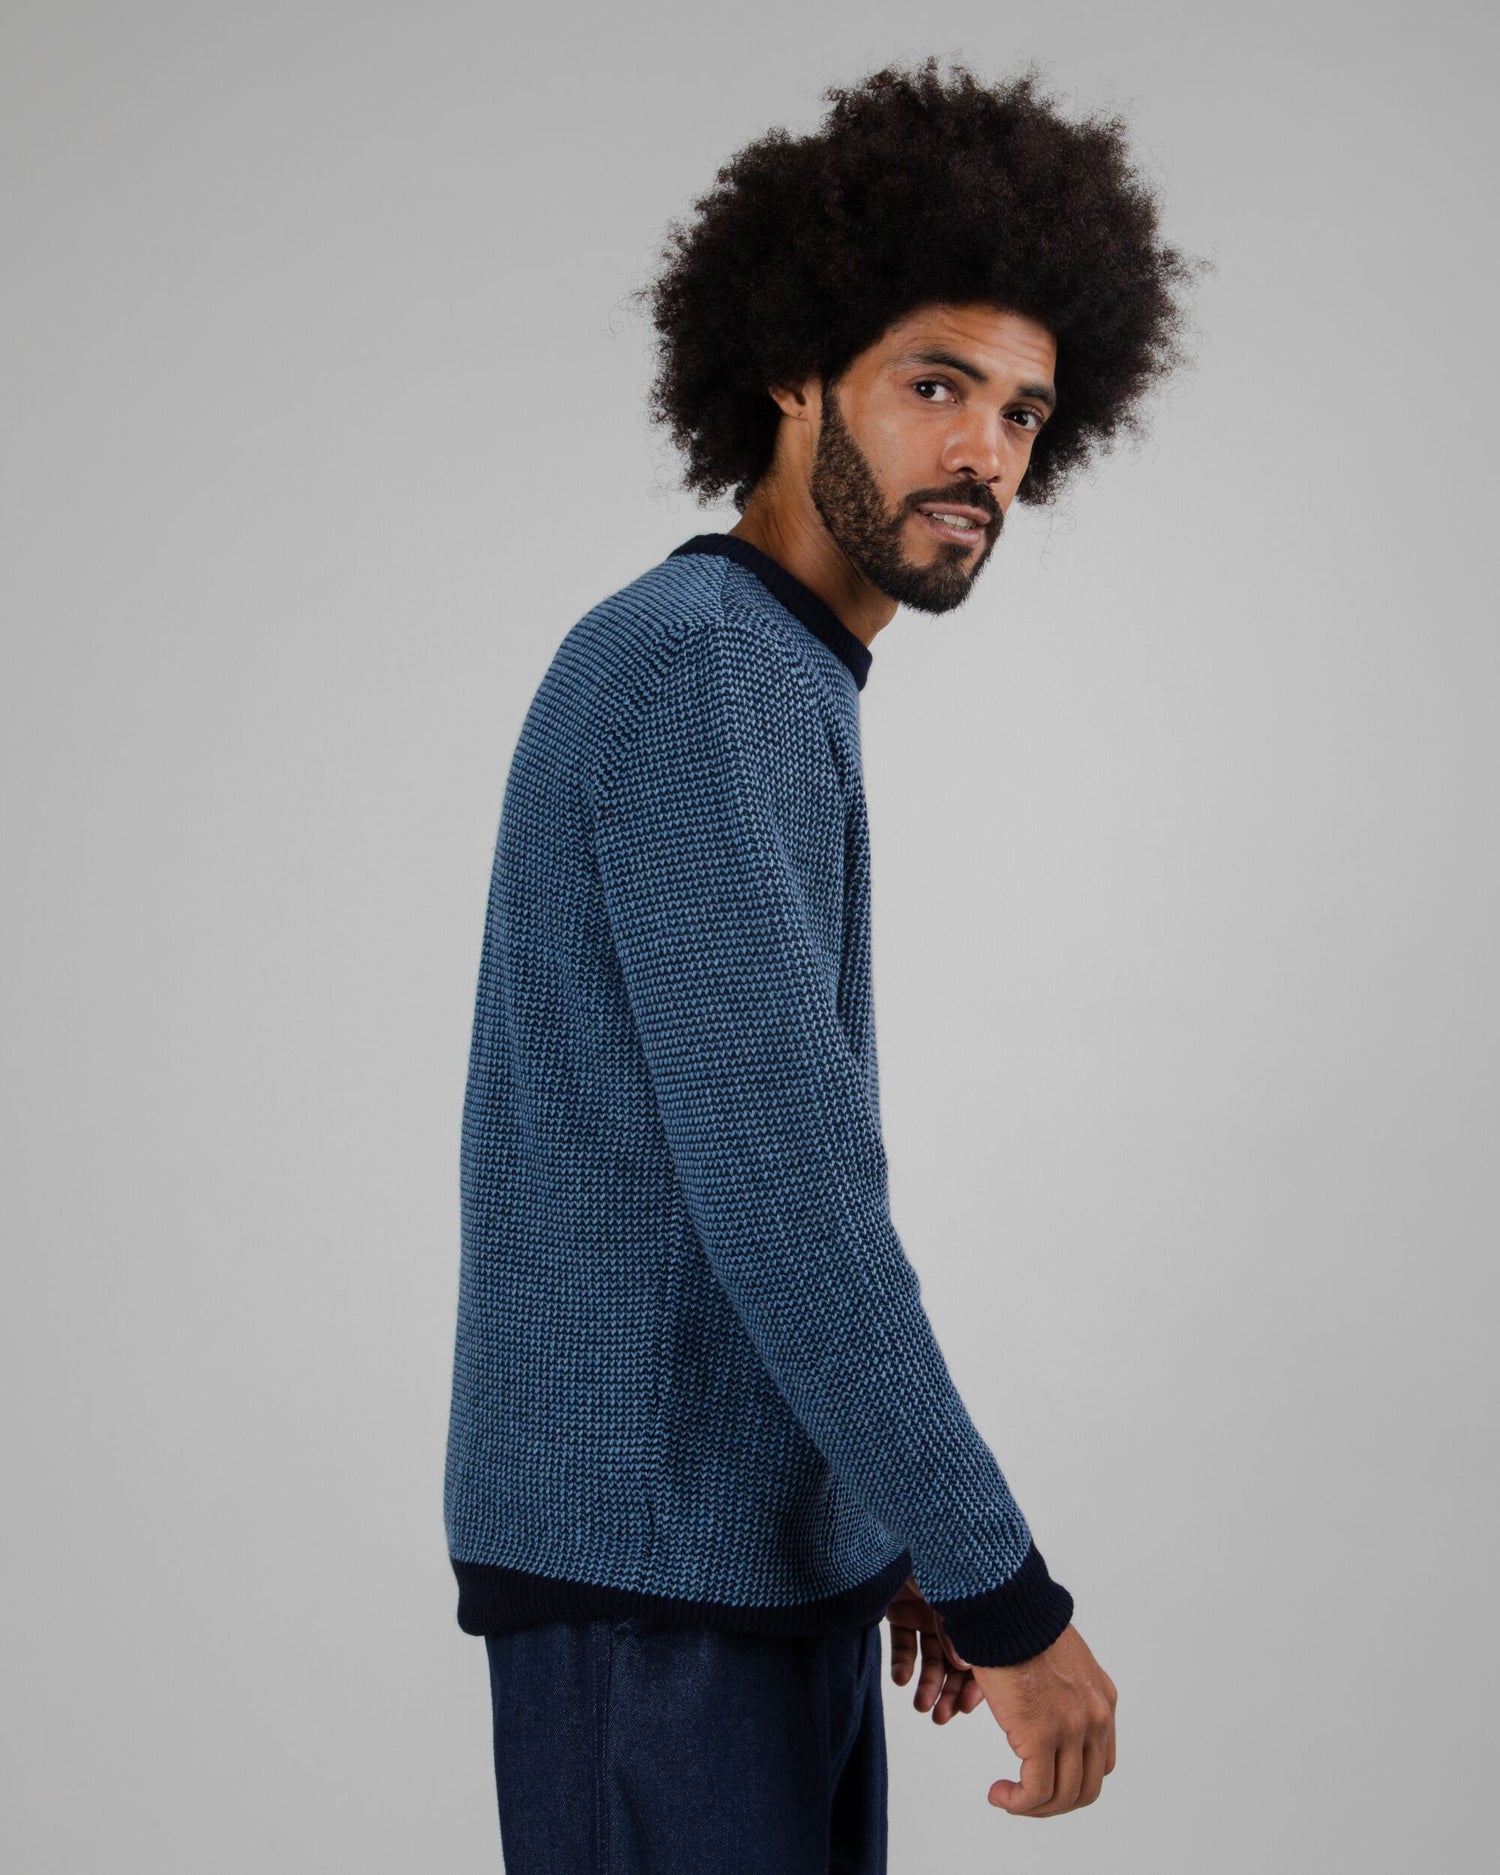 Contrast Wool Cashmere Sweater Navy